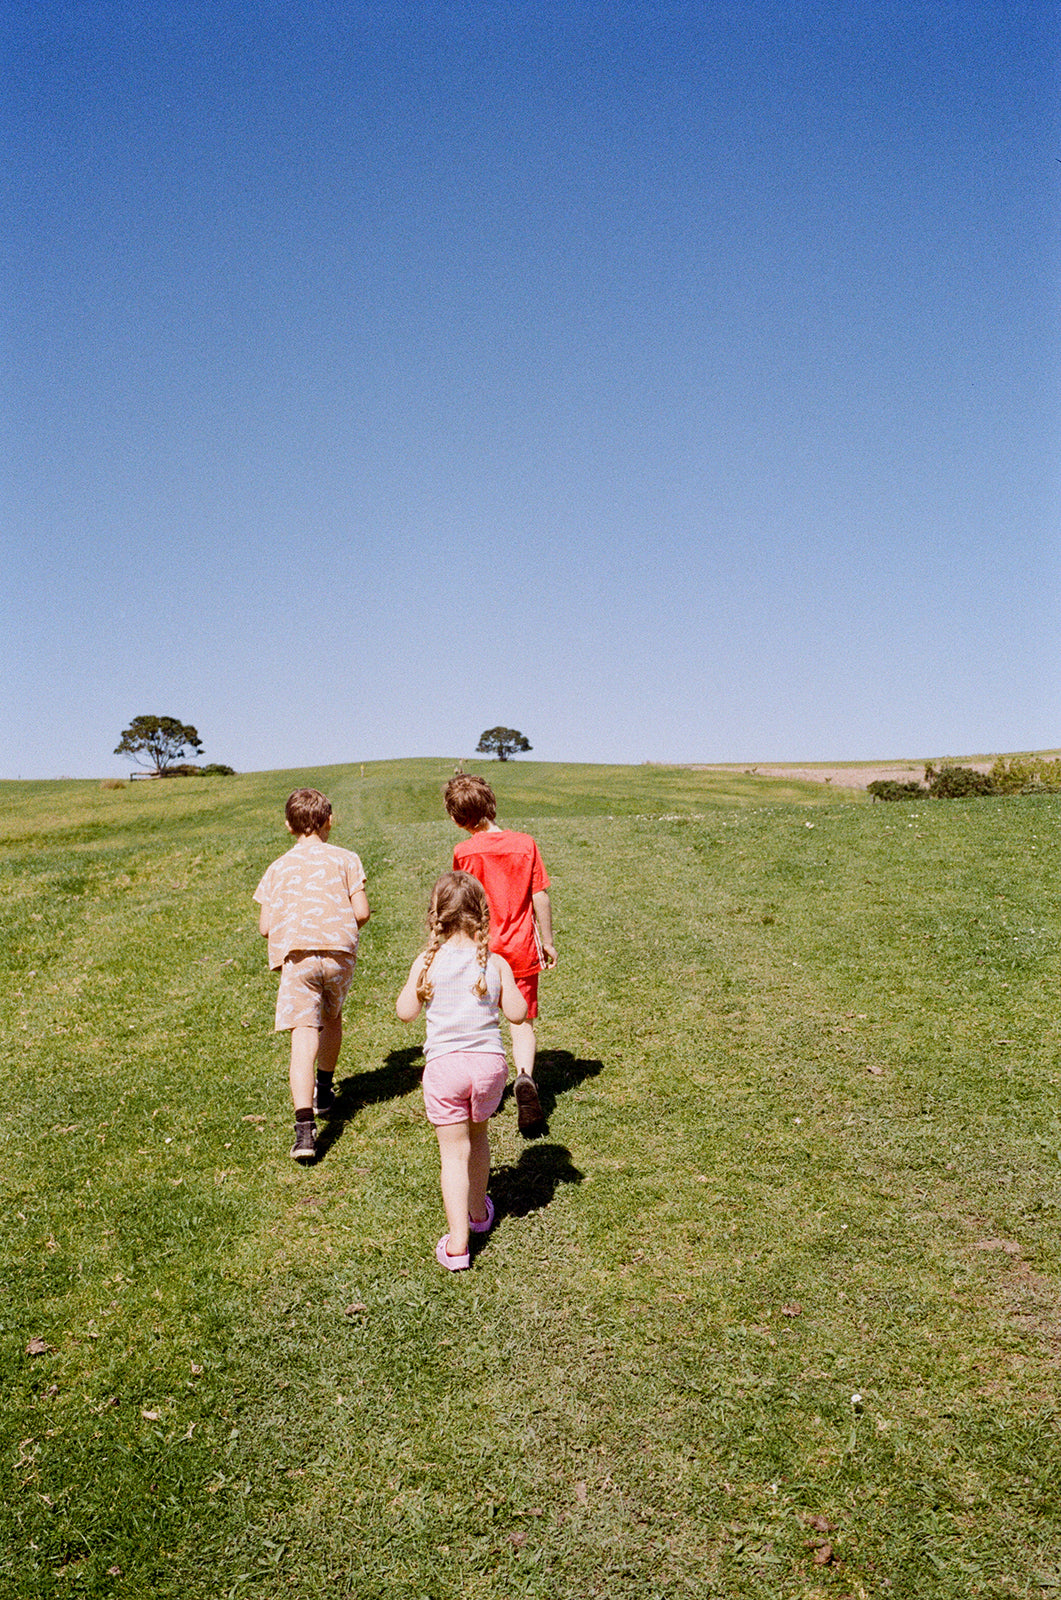 Kids explore a sheep paddock on a sunny day.